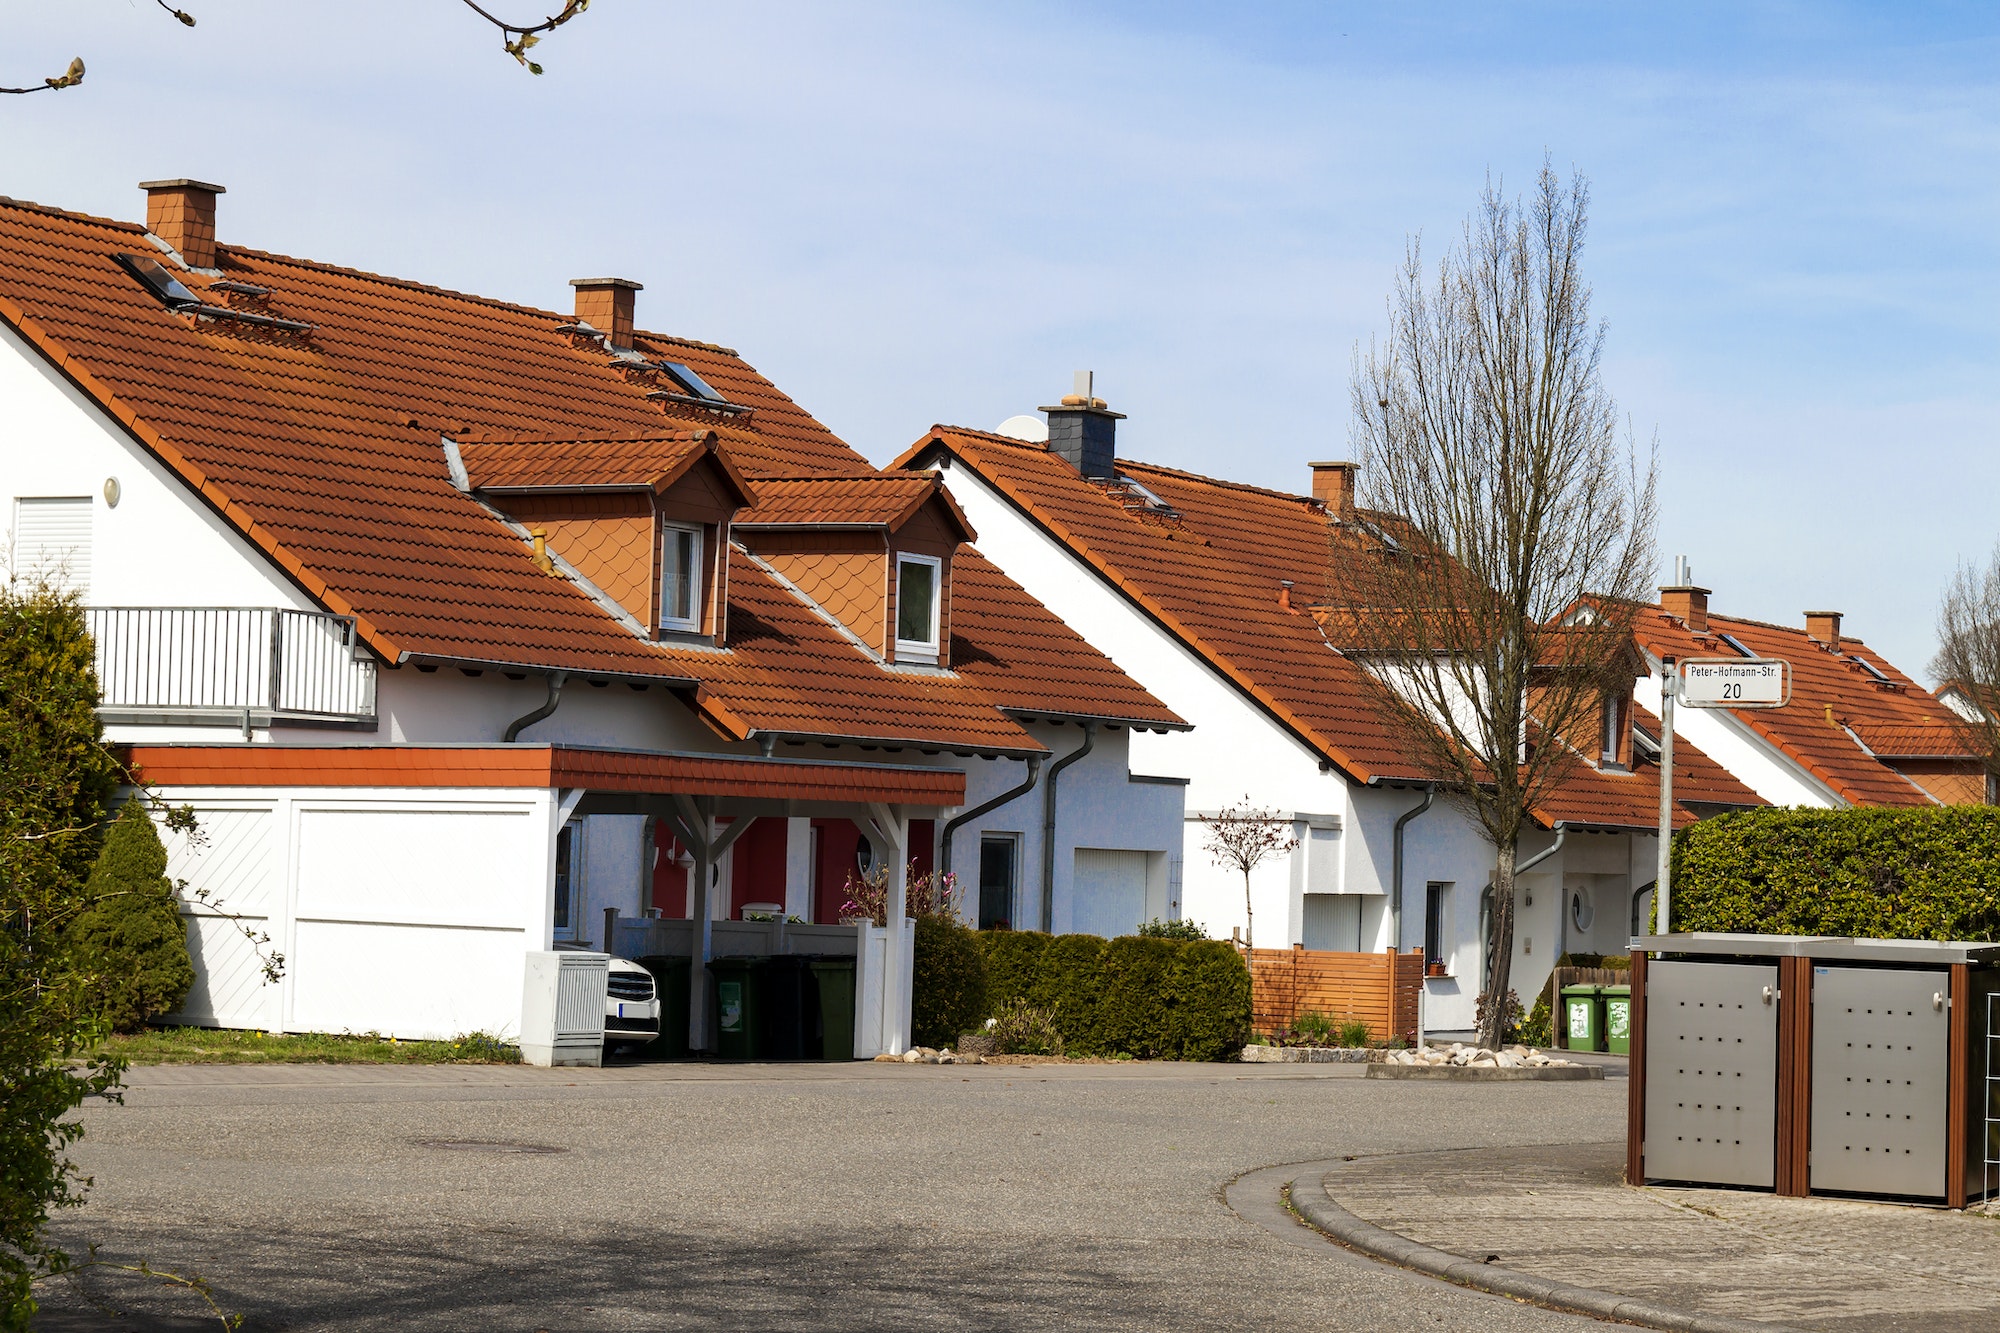 Classic german residential houses with orange roofing tiles and windows